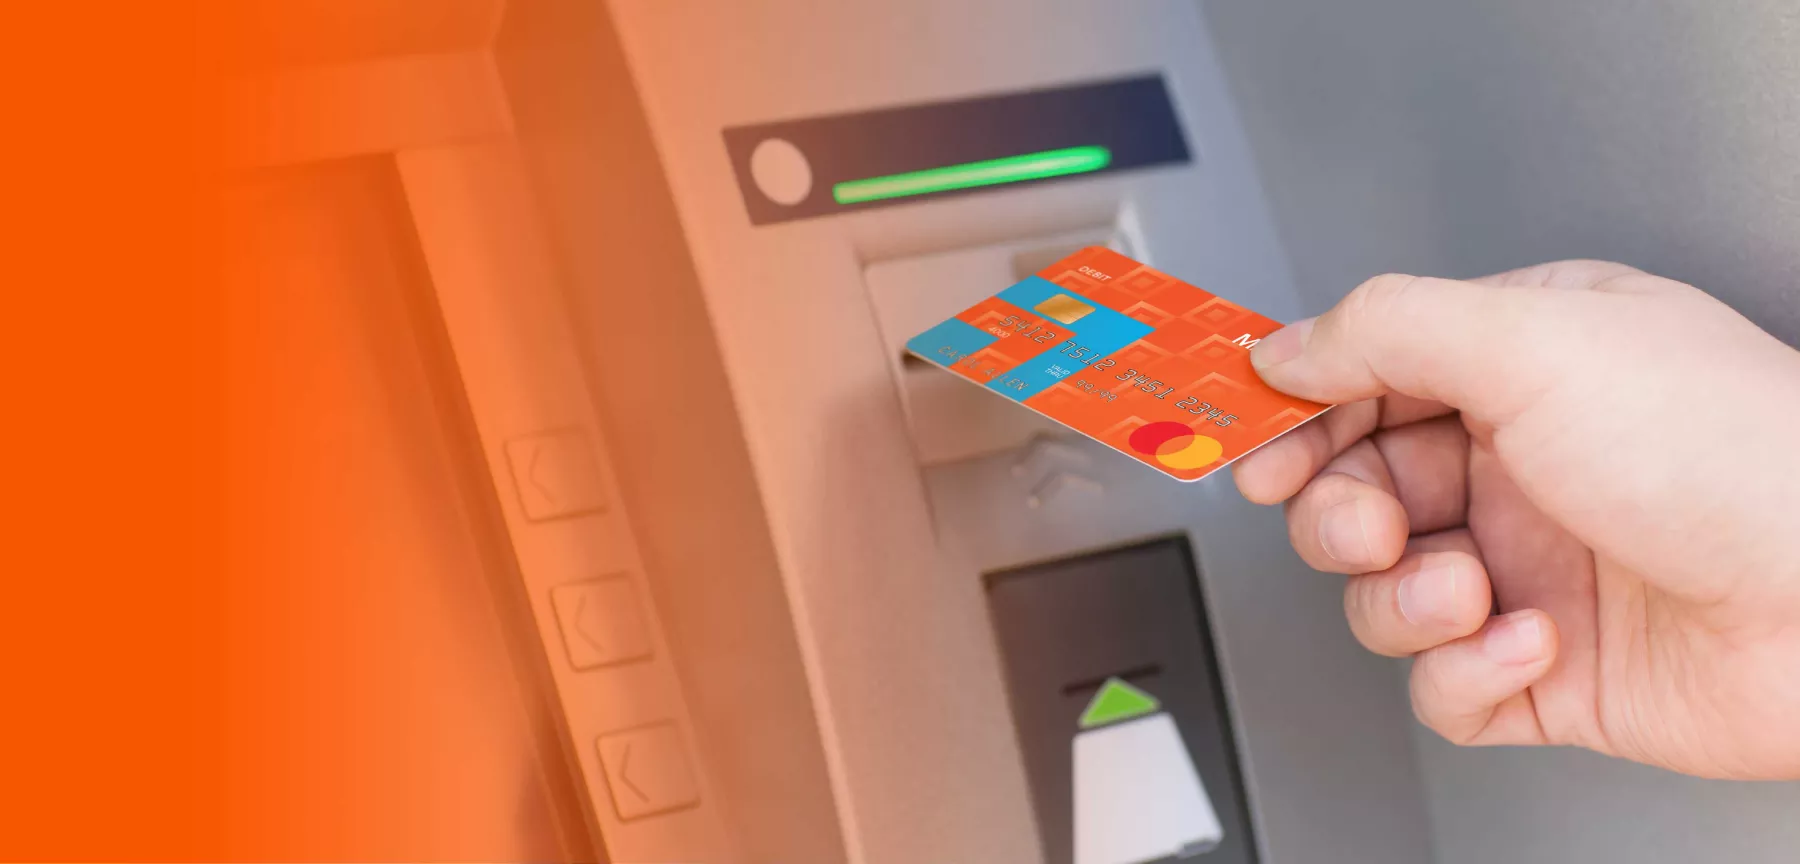 hand placing a midland card into the atm